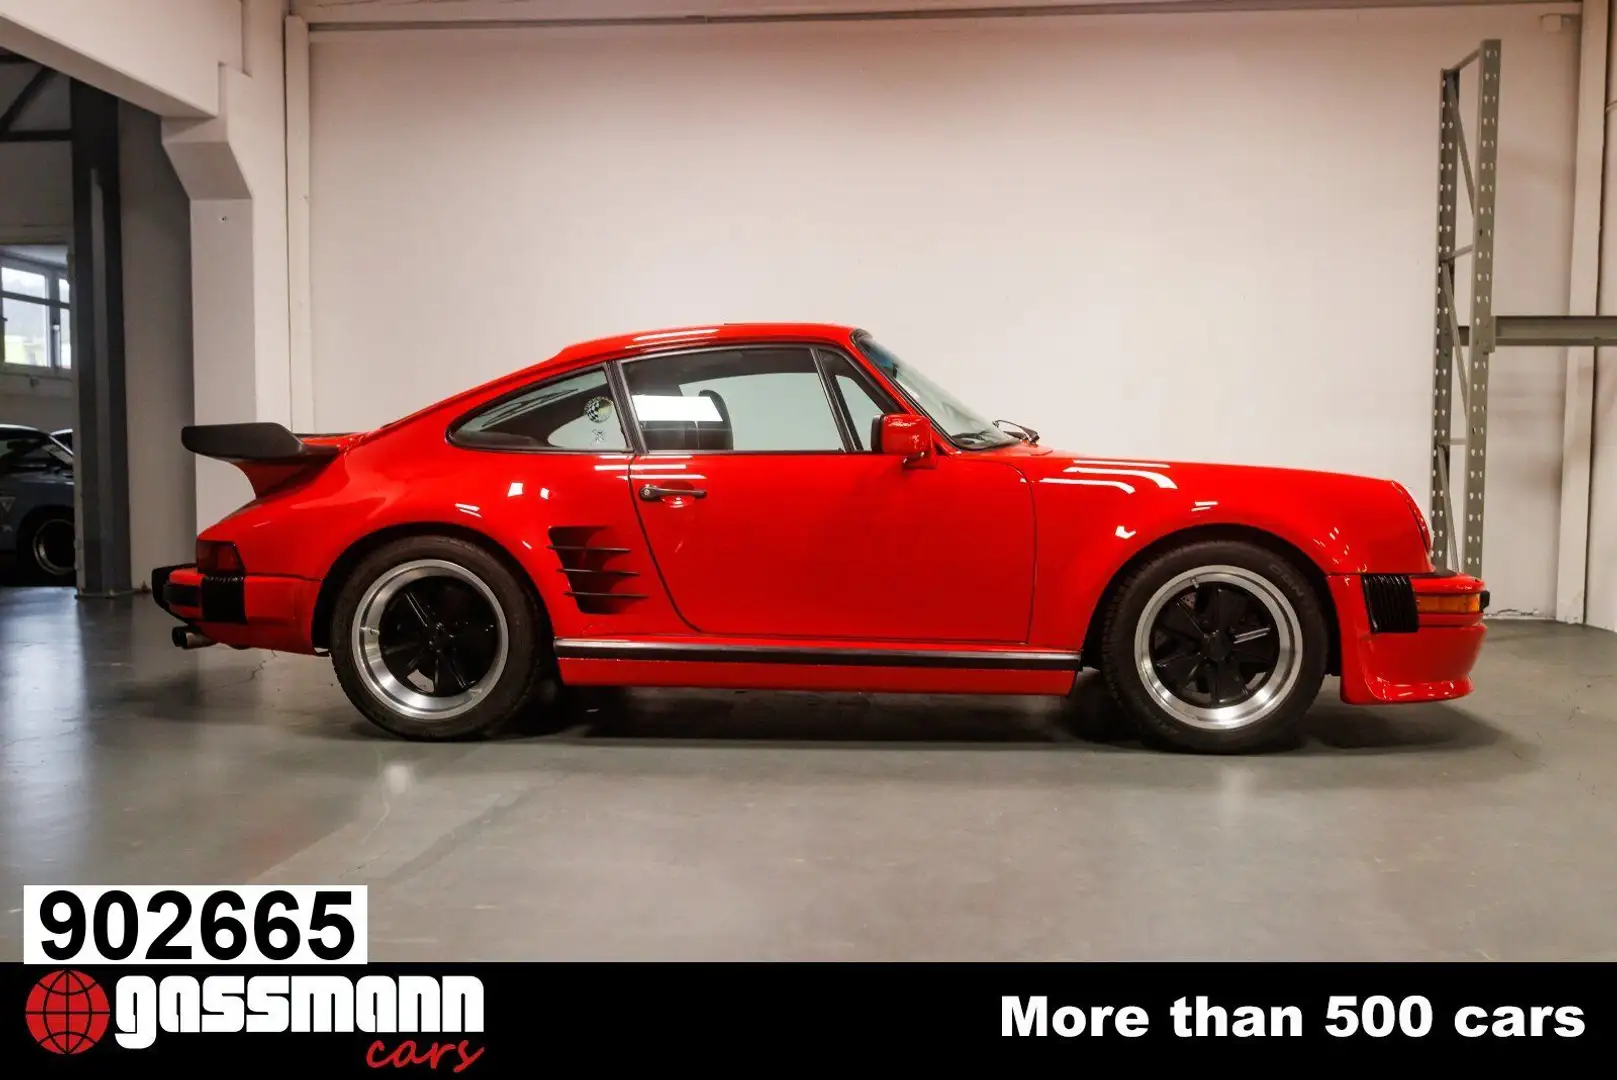 Porsche 930 / 911 3.3 Turbo - US Import Matching Numbers - 1